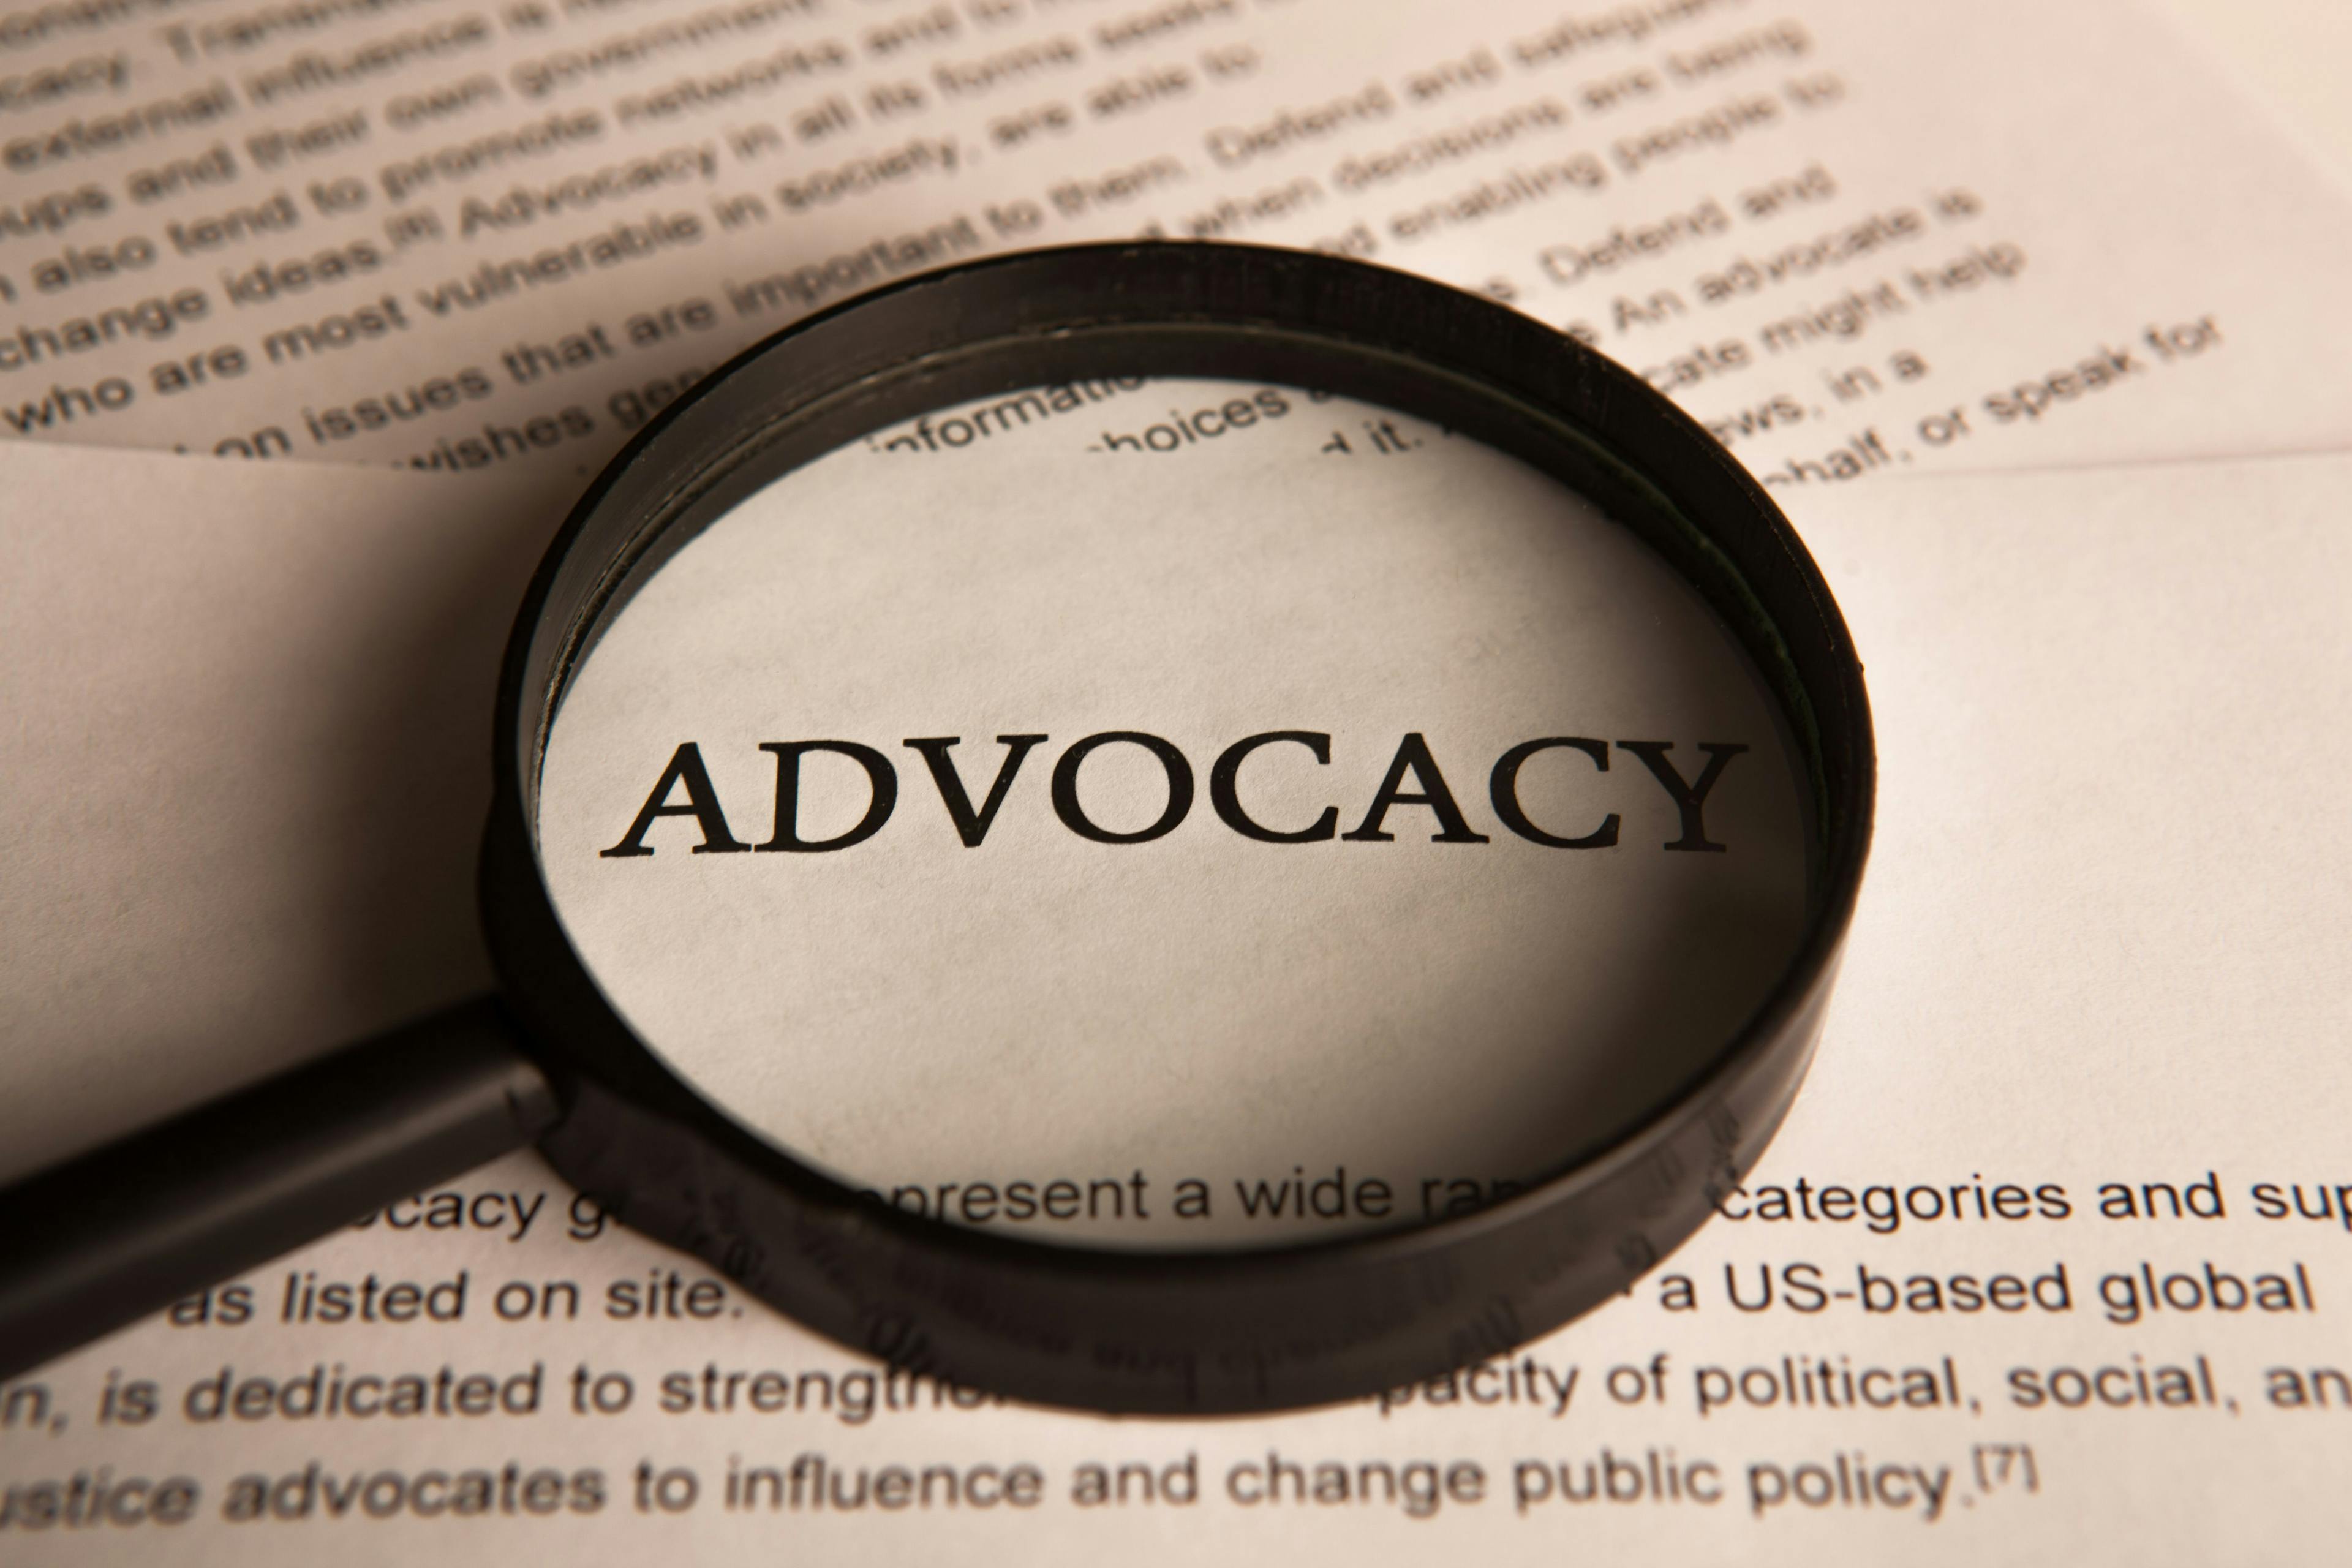 magnifying glass over the word "advocacy"